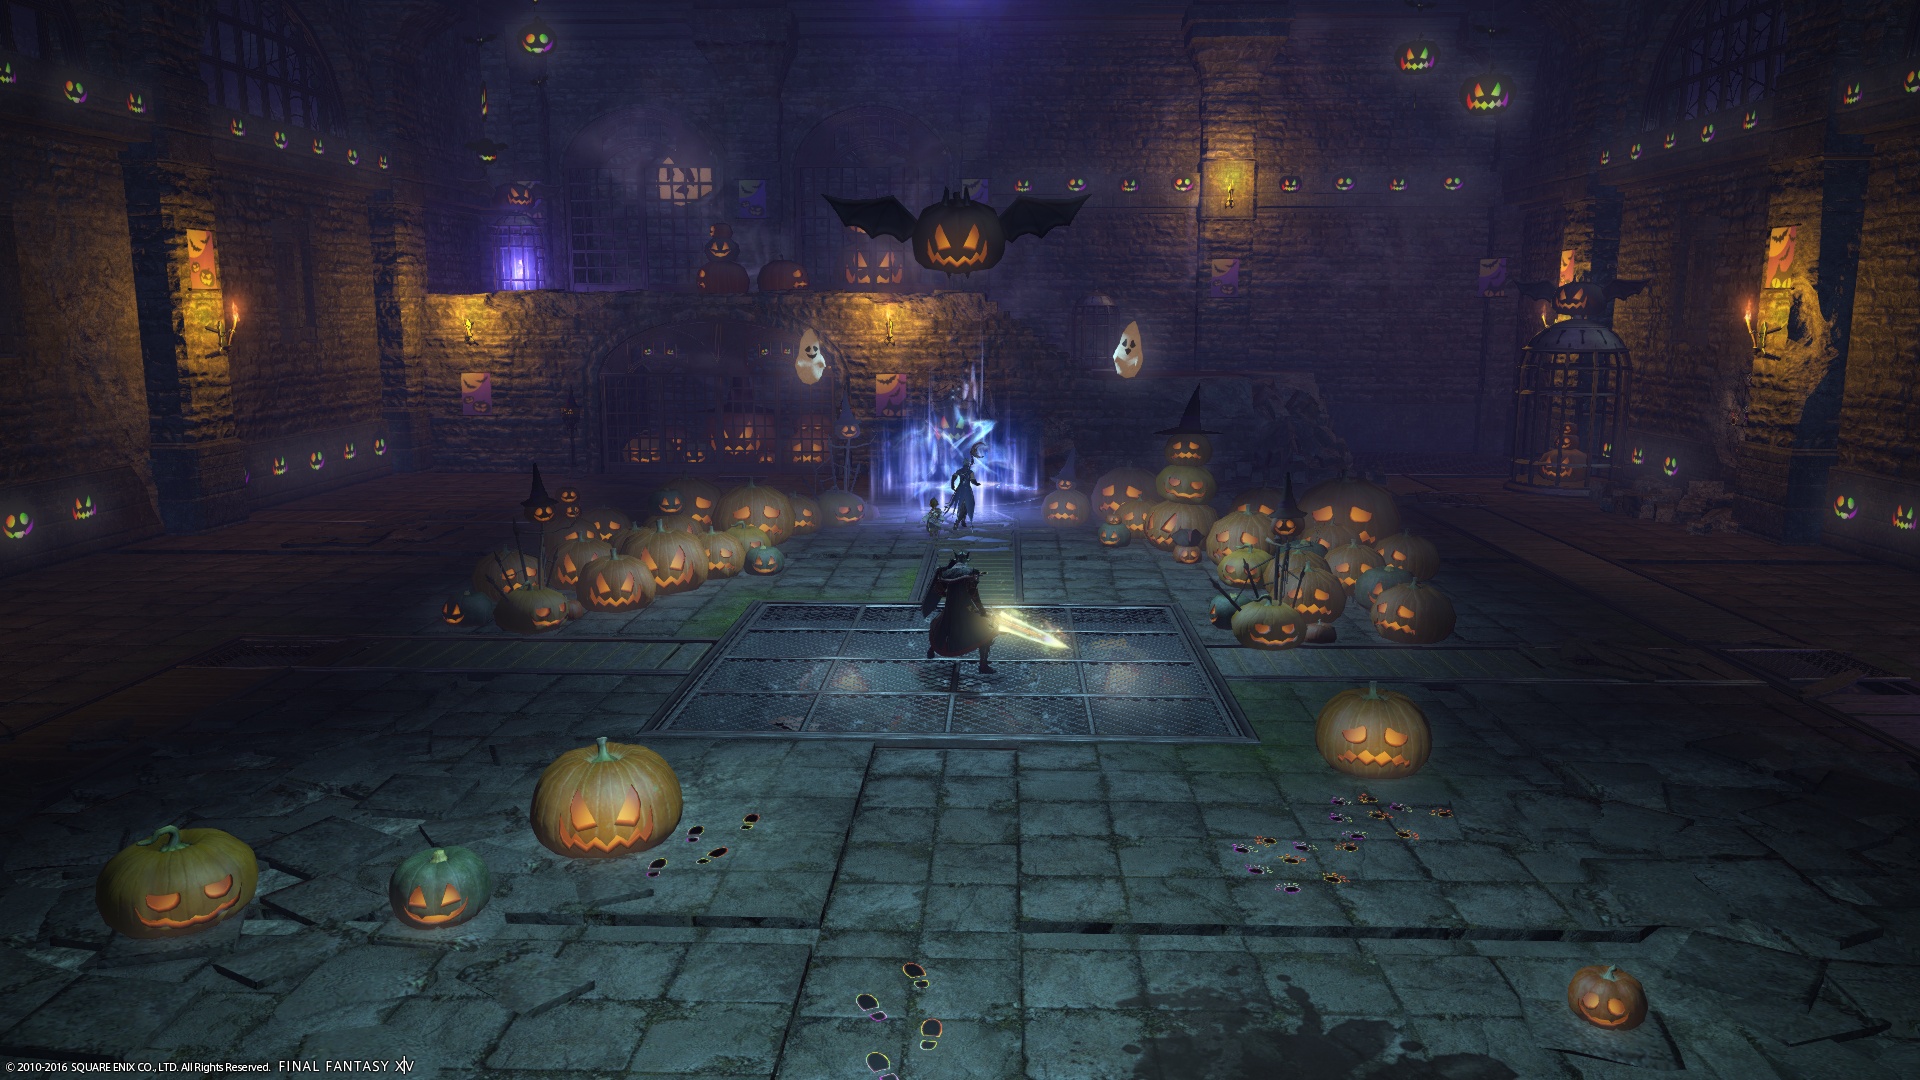 Final Fantasy XIV's Halloween event is a perfect example of how to make